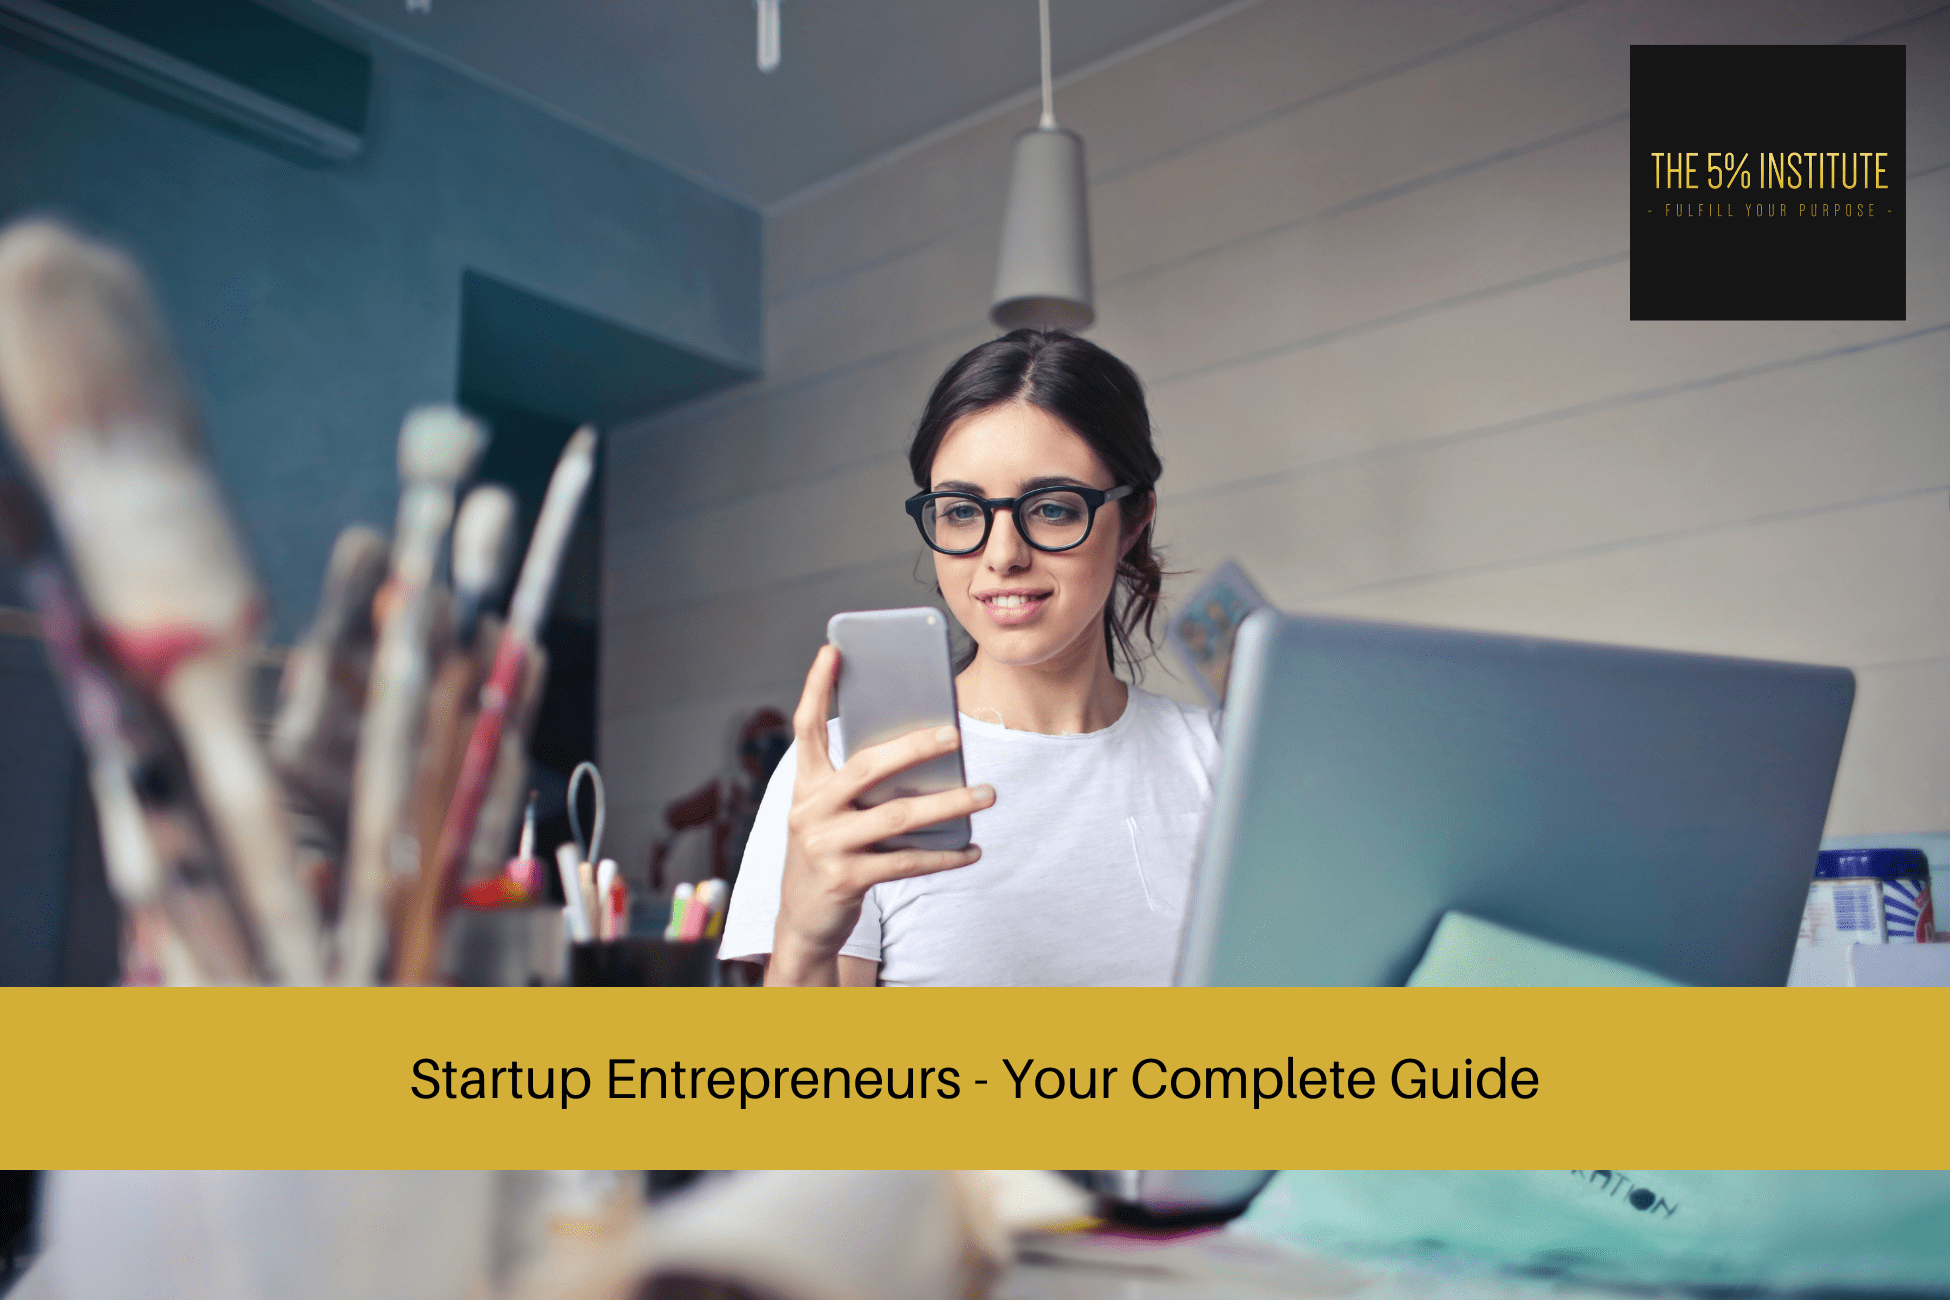 Startup Entrepreneurs - Your Complete Guide